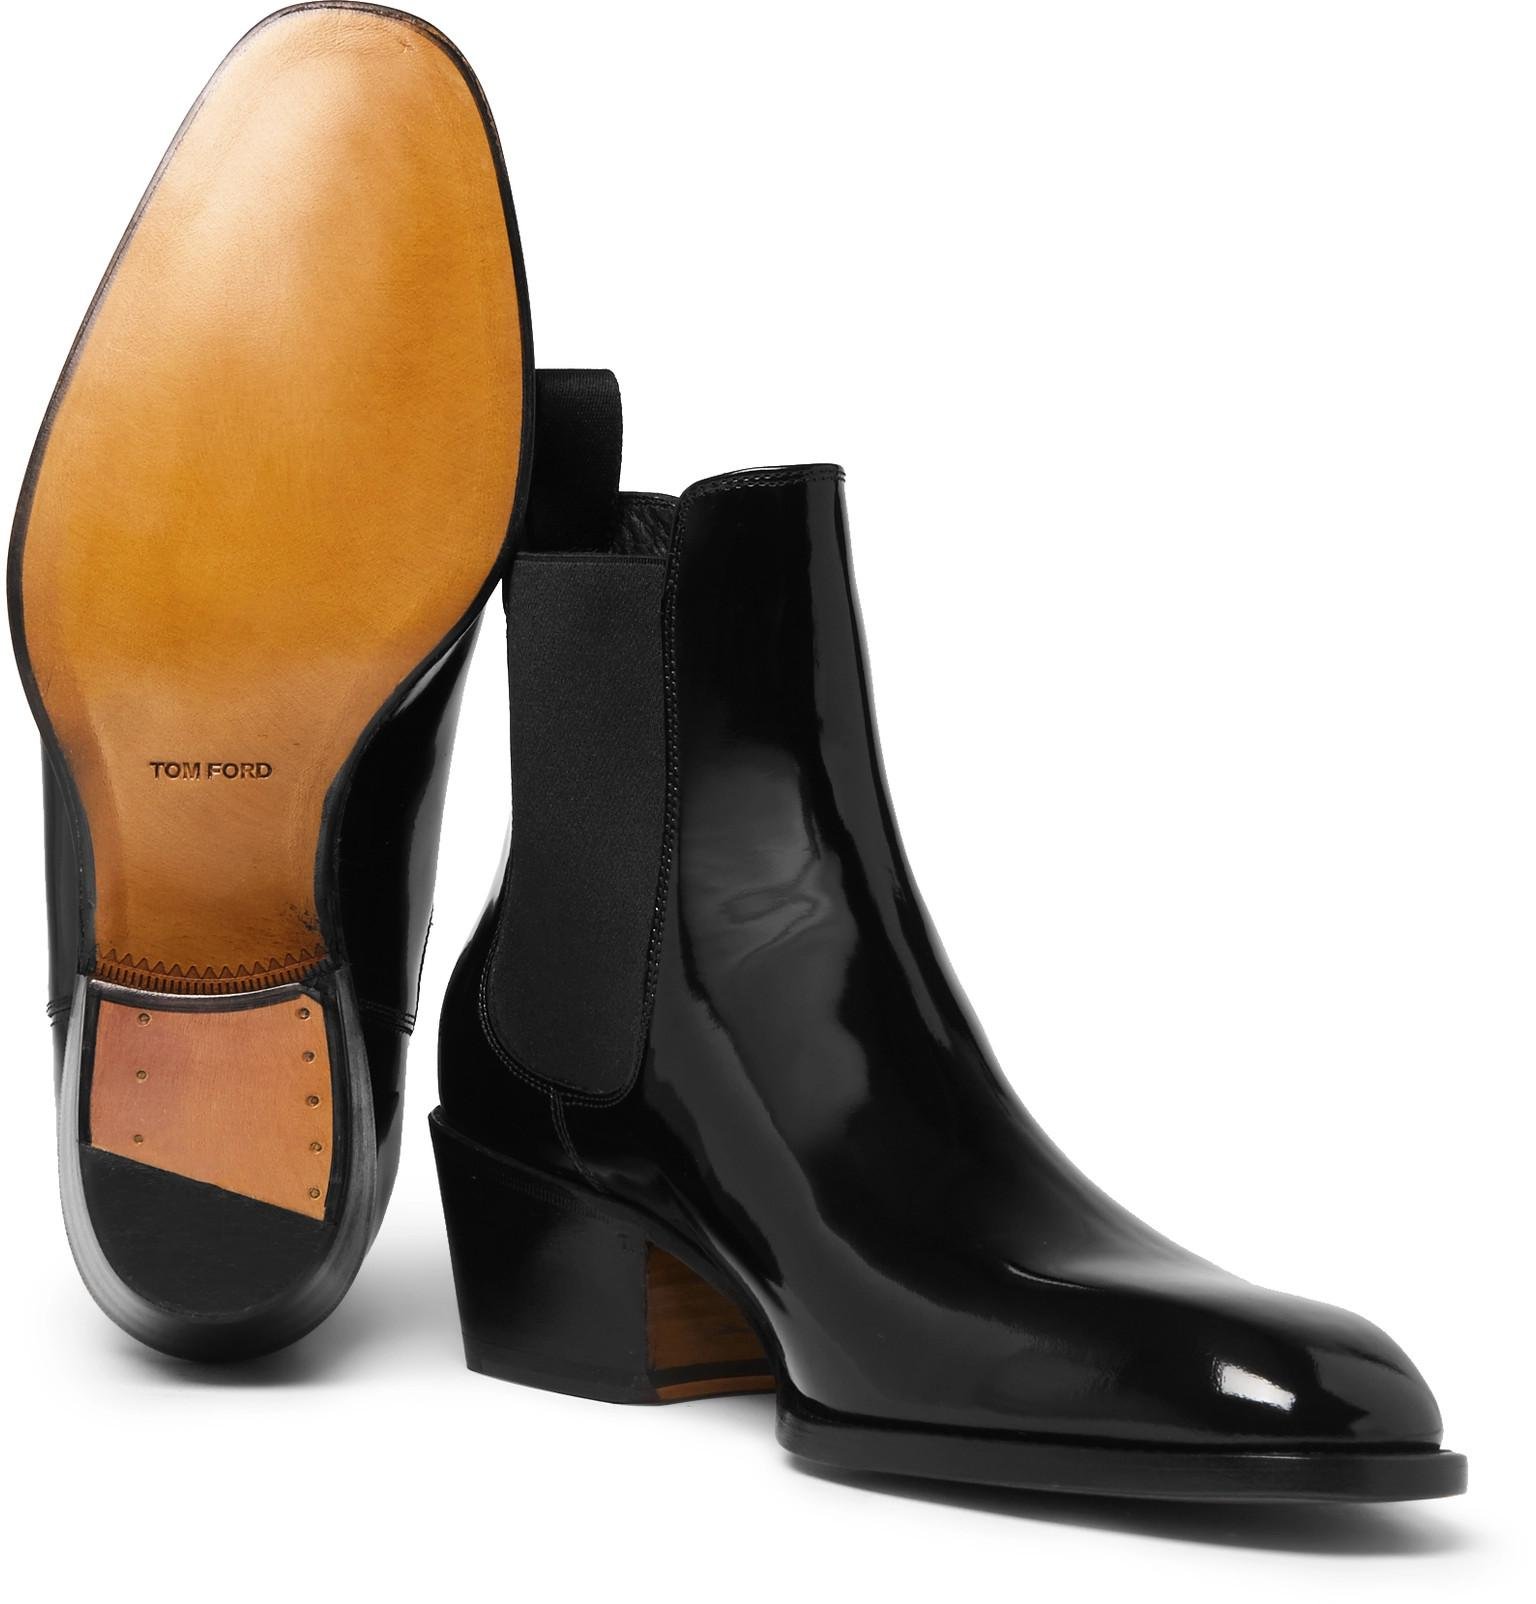 Tom Ford Webster Patent-leather Chelsea Boots in Black for Men - Lyst